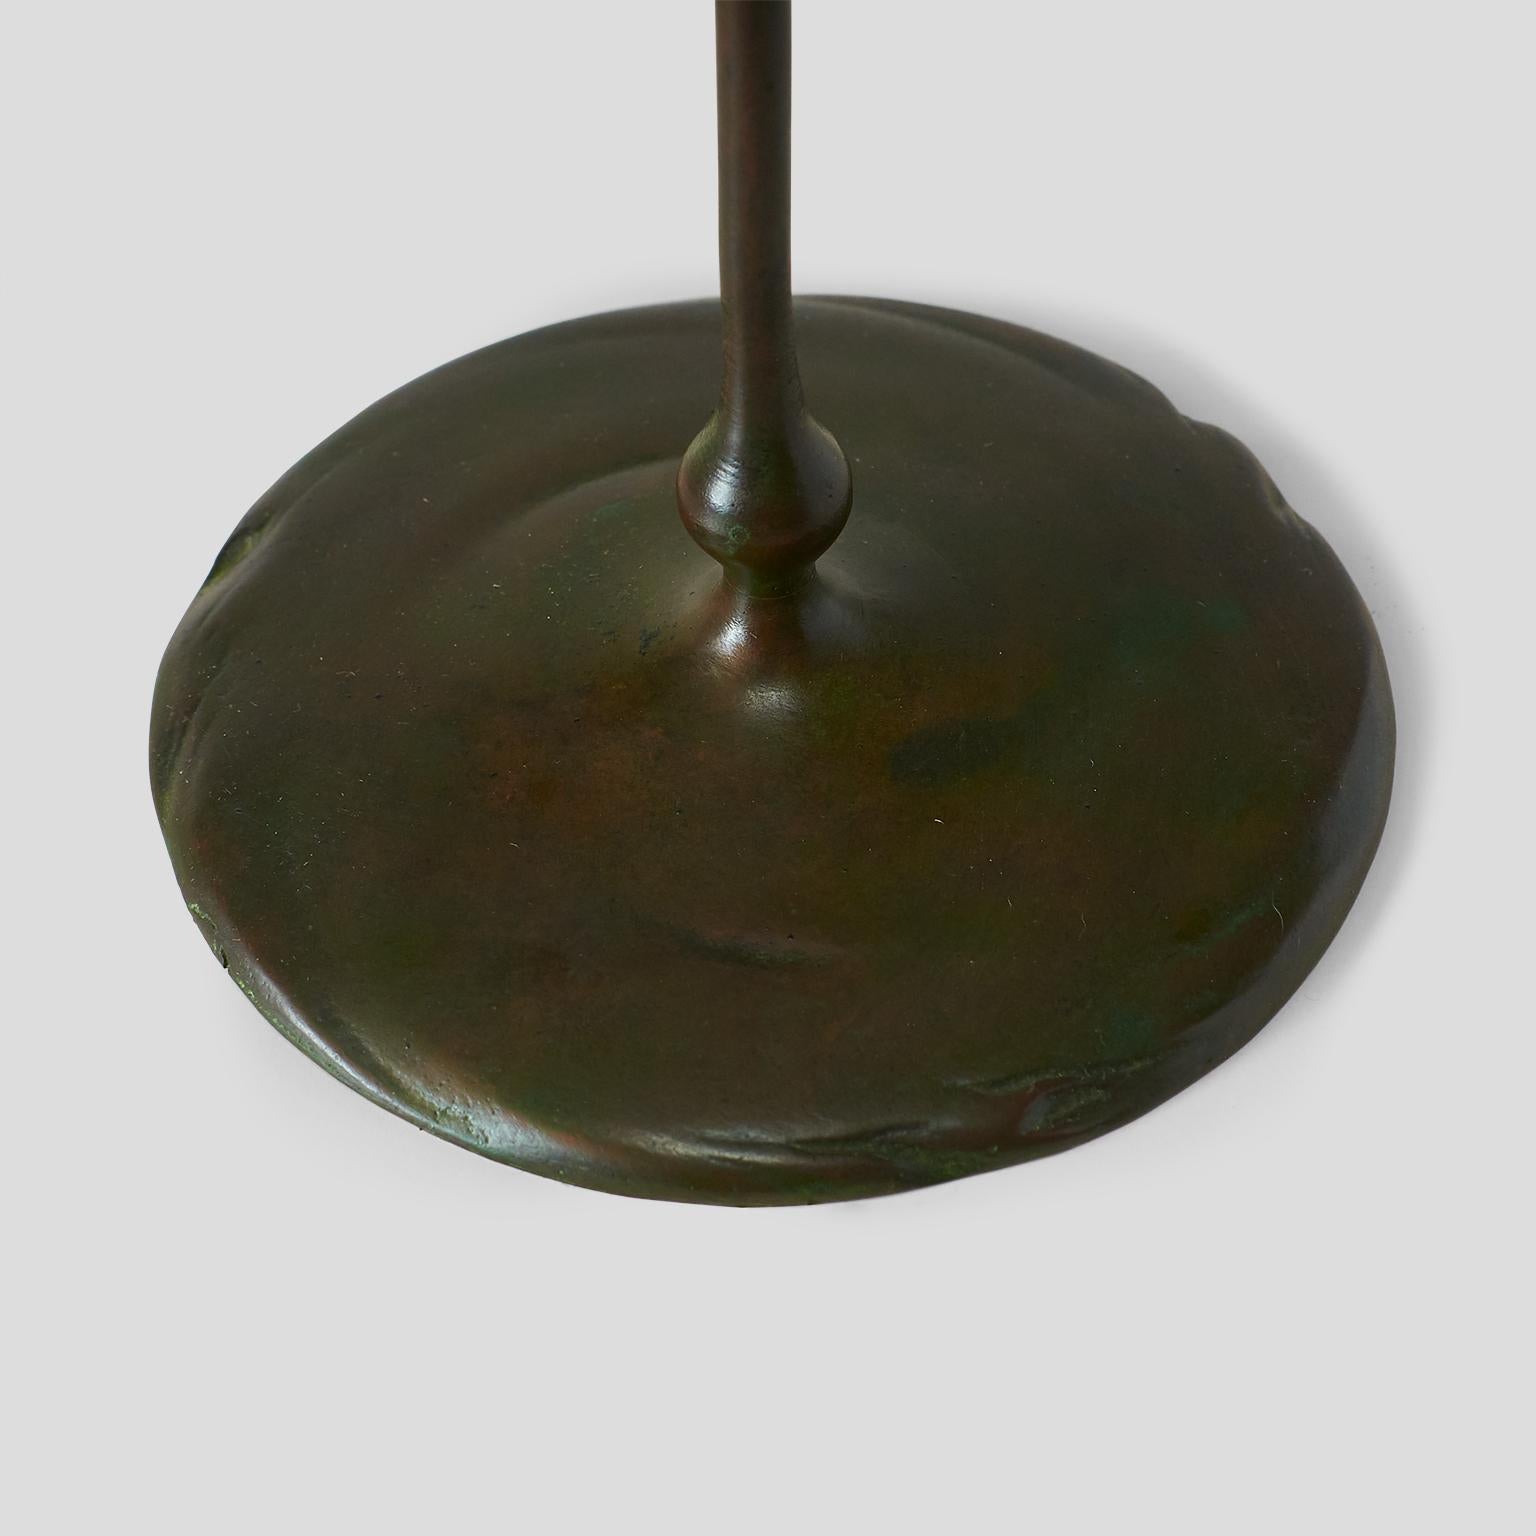 American Bronze & Enameled Candlestick by Tiffany Studios